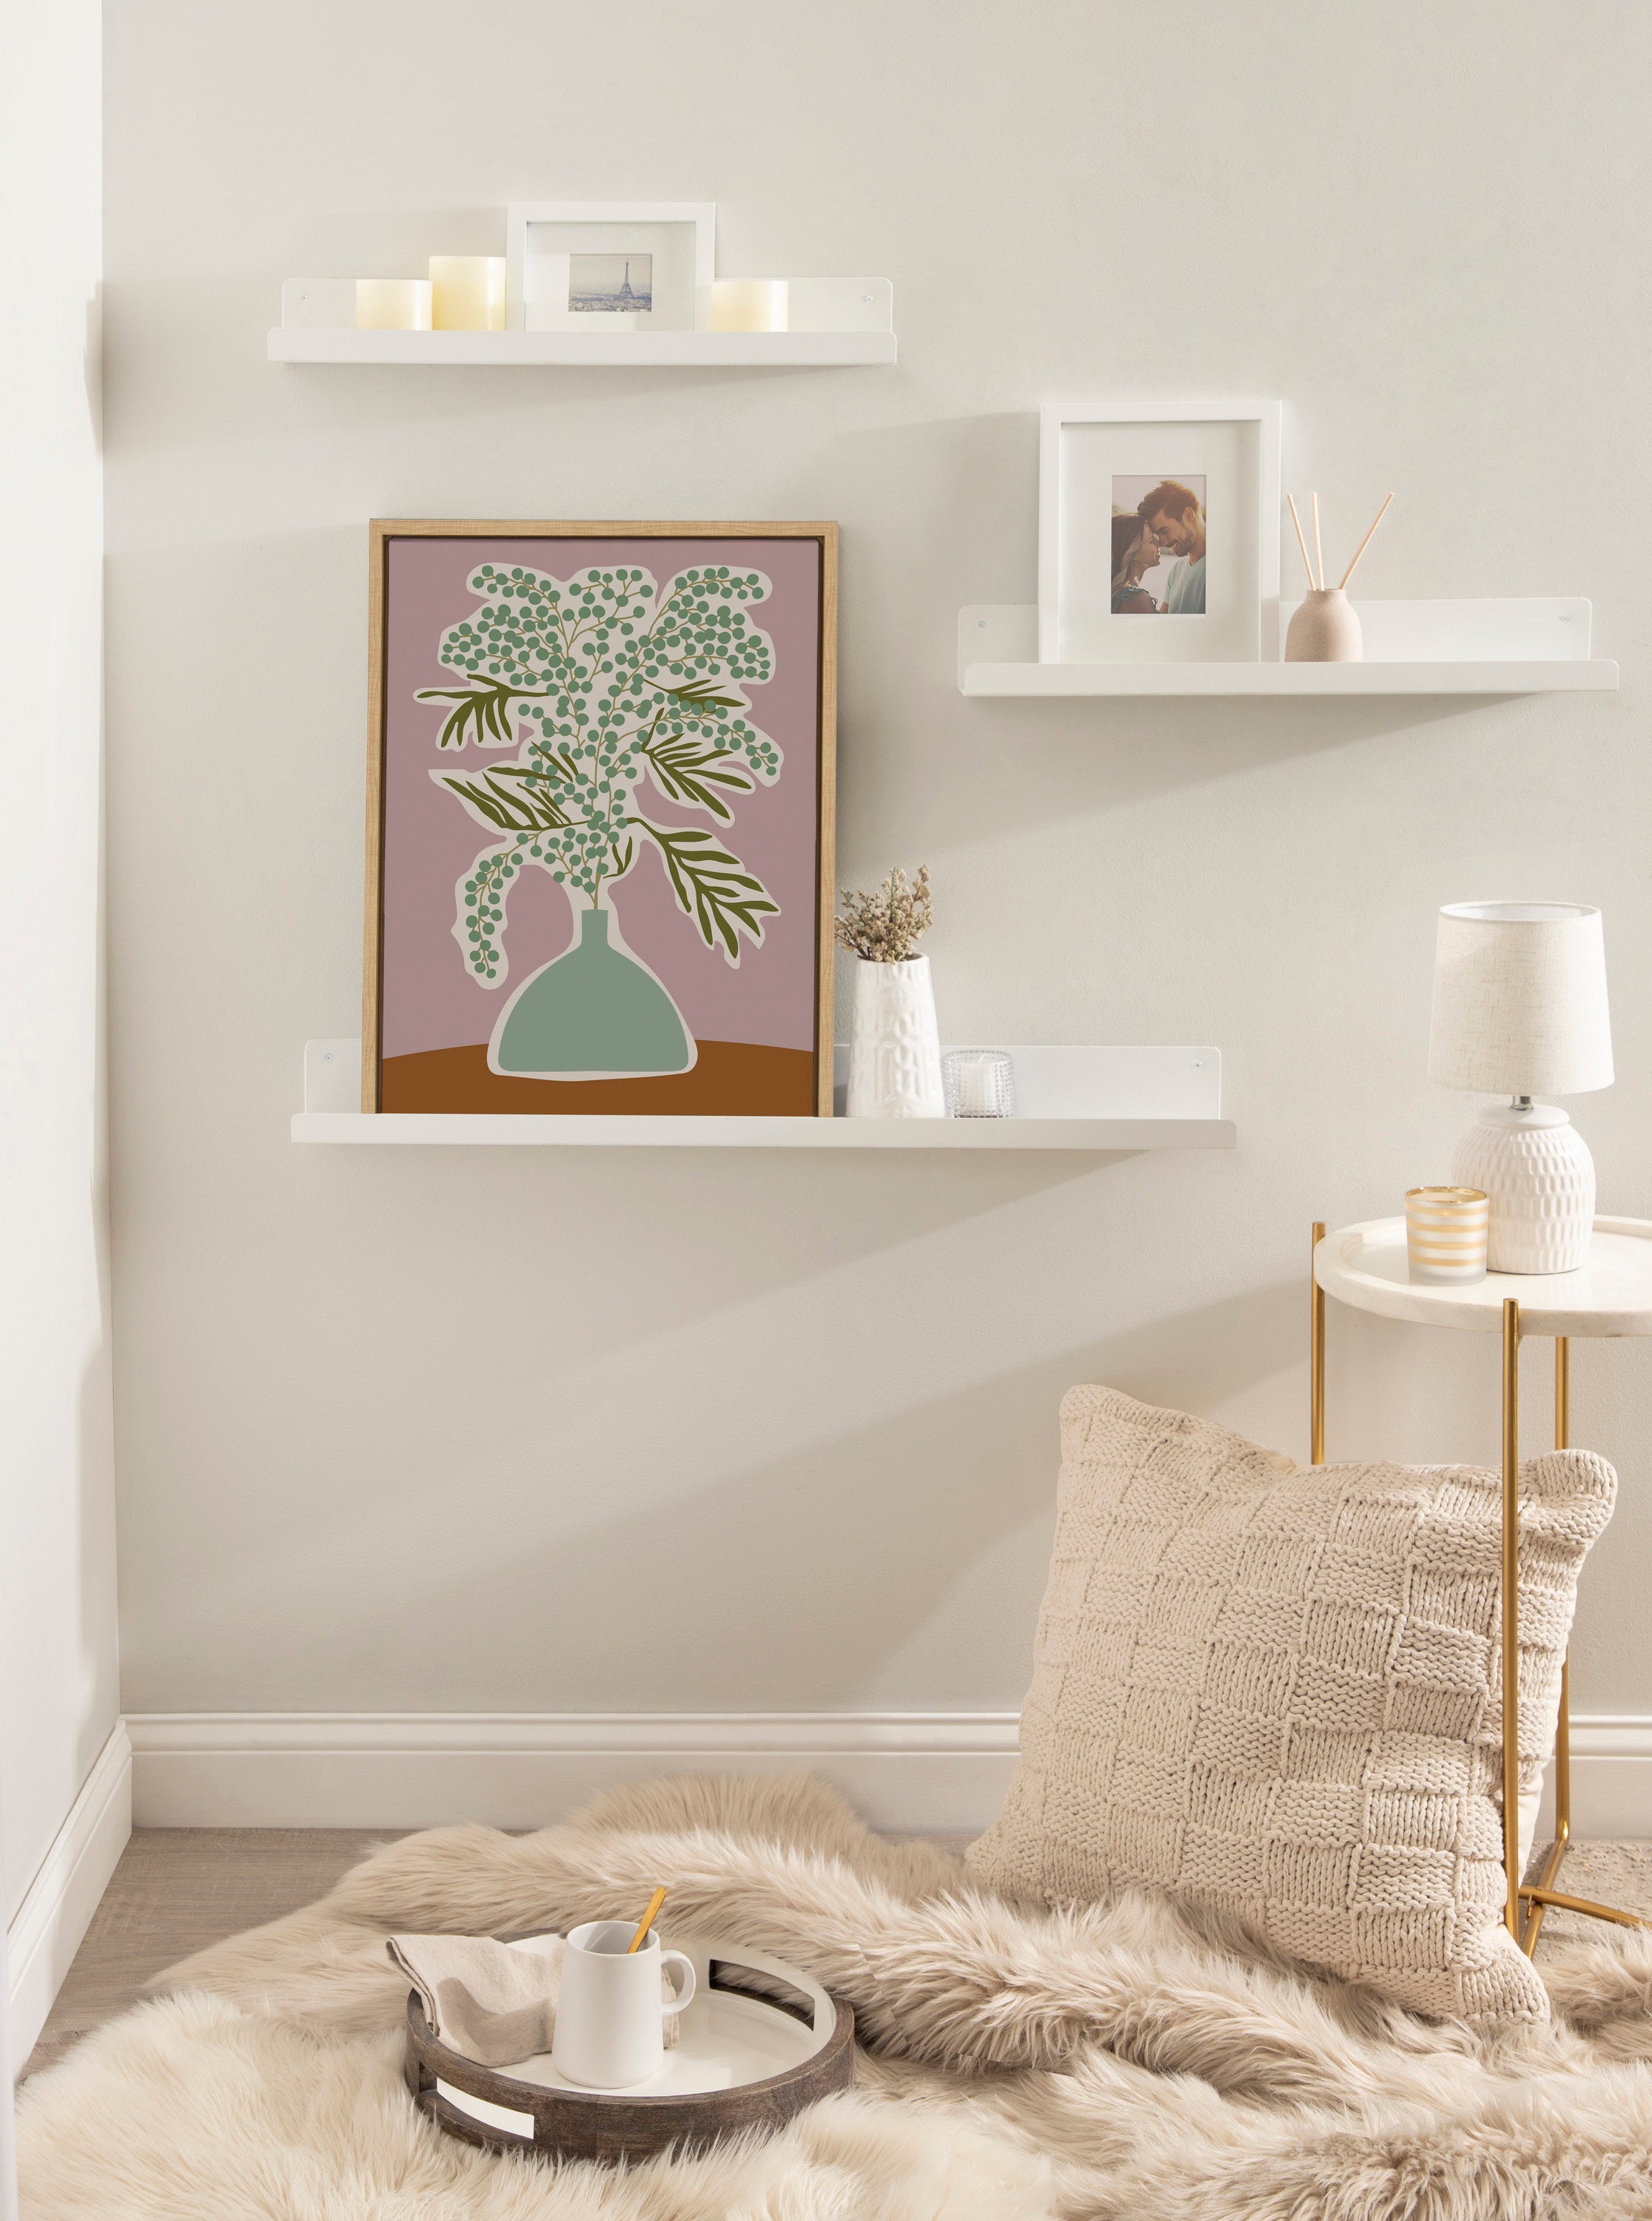 Sylvie Expressive Abstract House Plant Green on Pink Framed Canvas by The Creative Bunch Studio